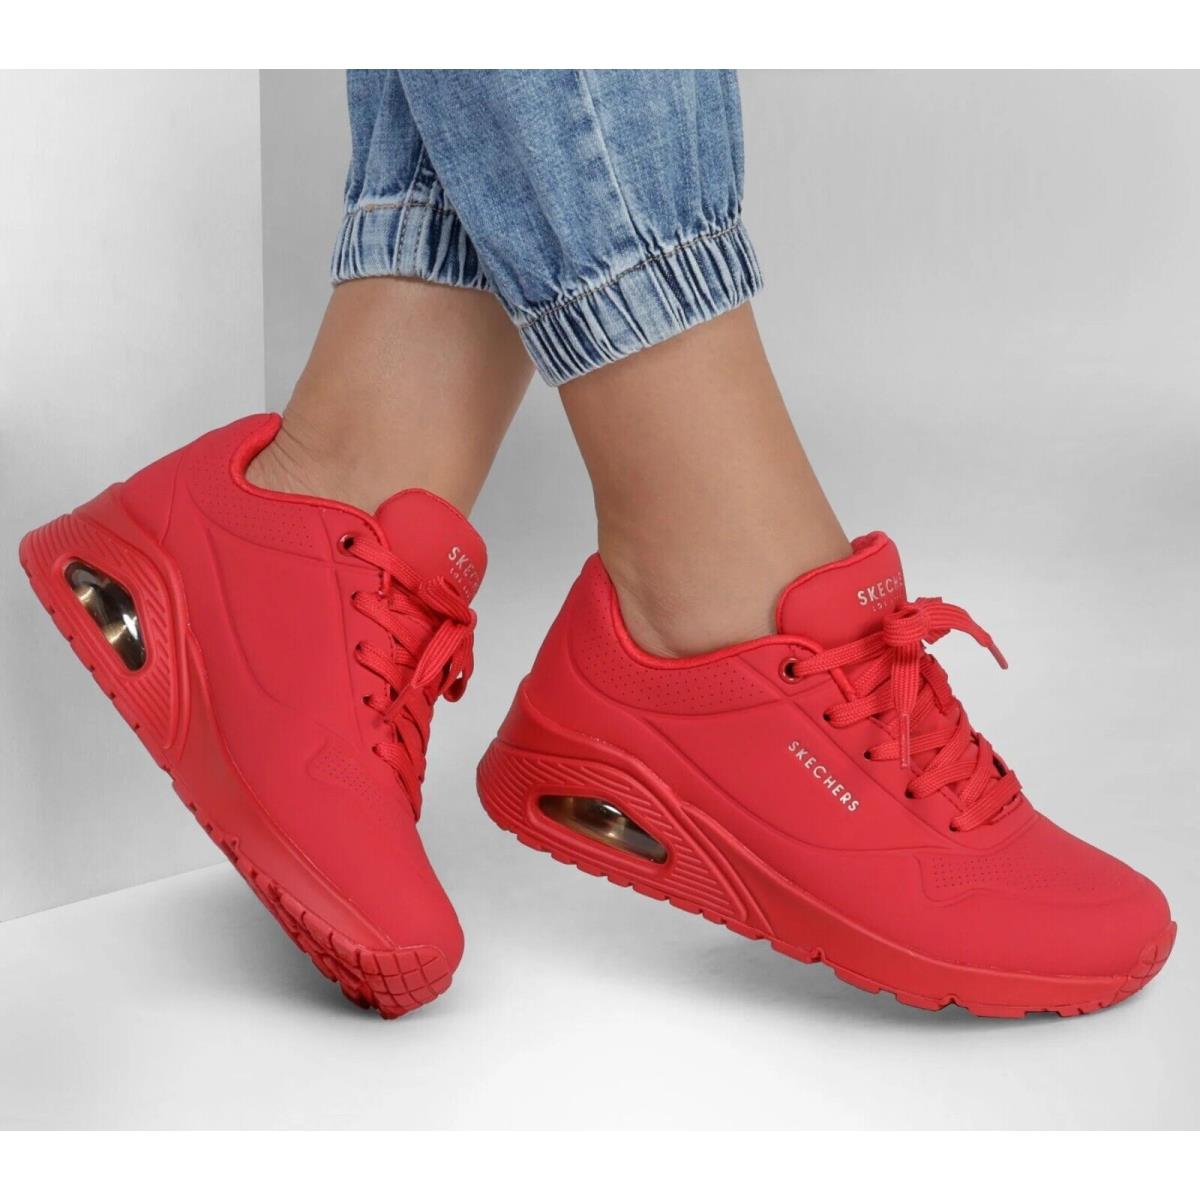 Skechers shoes  - Red 6